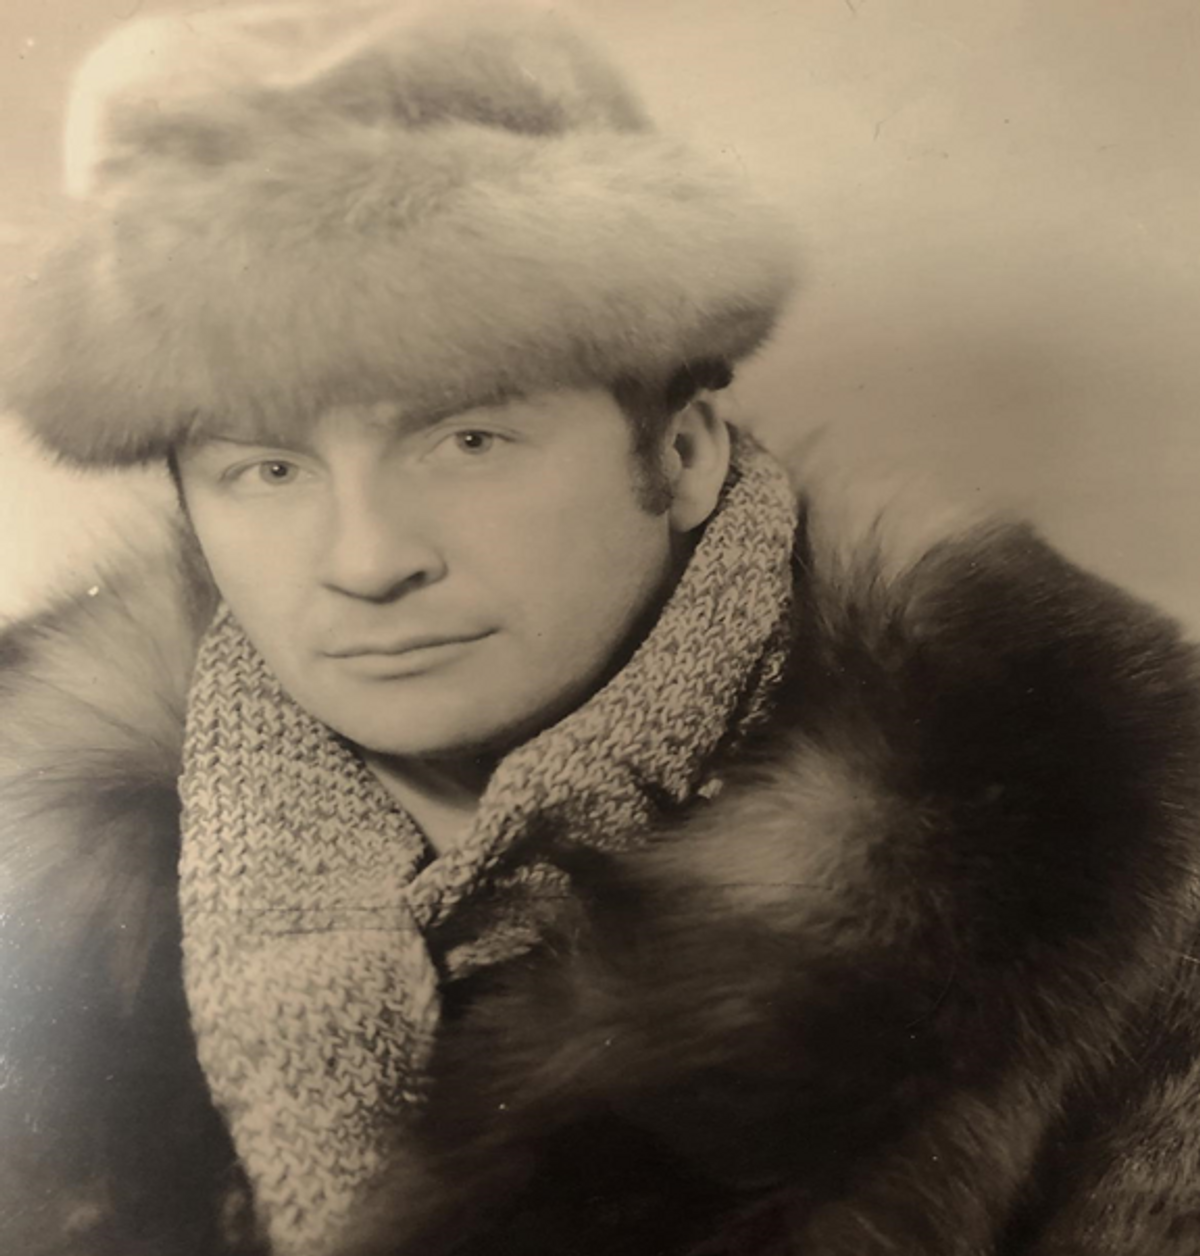 Nayfeld in Belarus, circa 1978, when he was a young blatnoy (or 'professional criminal'). He’s wearing more than 3,500 rubles’ worth of black market furs: A sable hat and a sealskin coat with a wolverine collar would have been two years’ salary for an engineer or other well-paid citizen of the USSR.